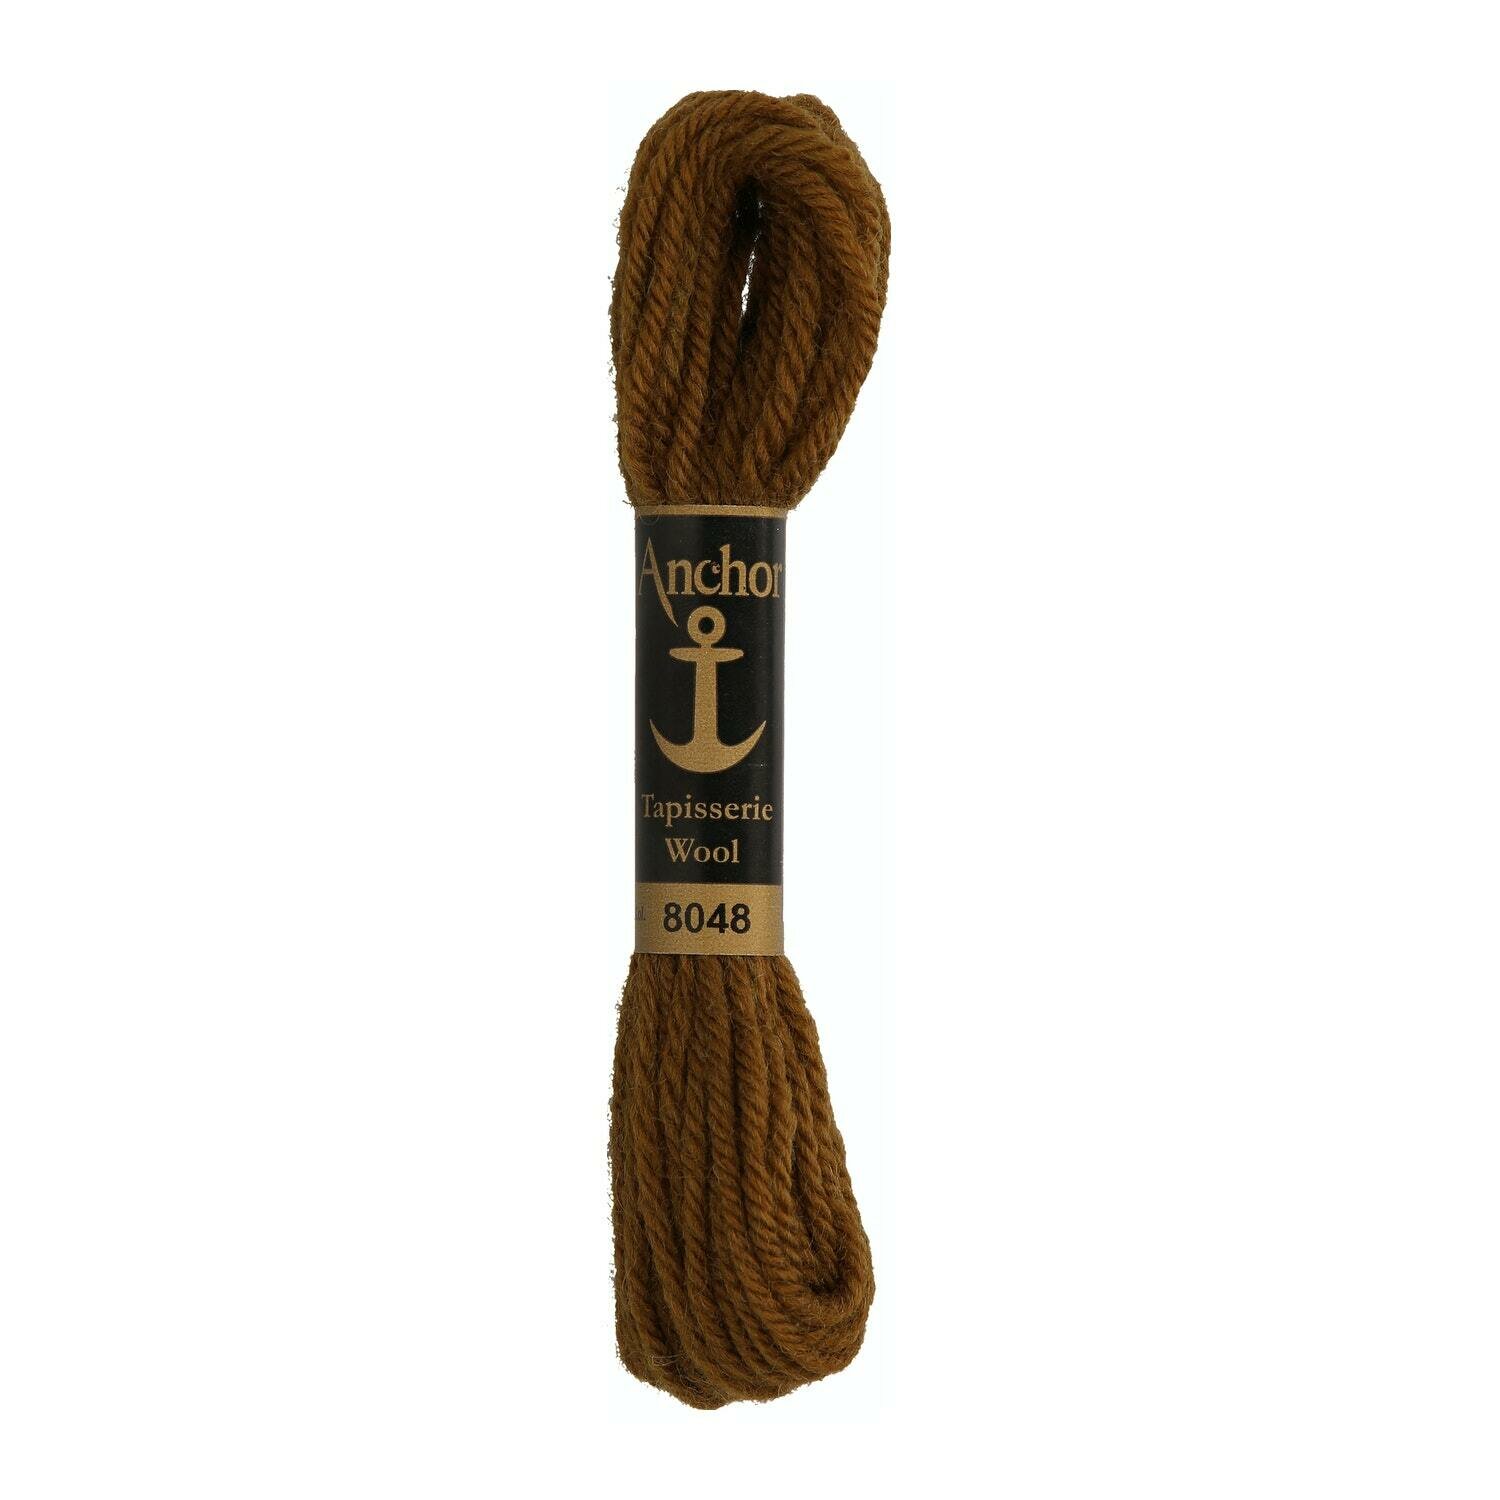 Anchor Tapisserie Wool # 08048